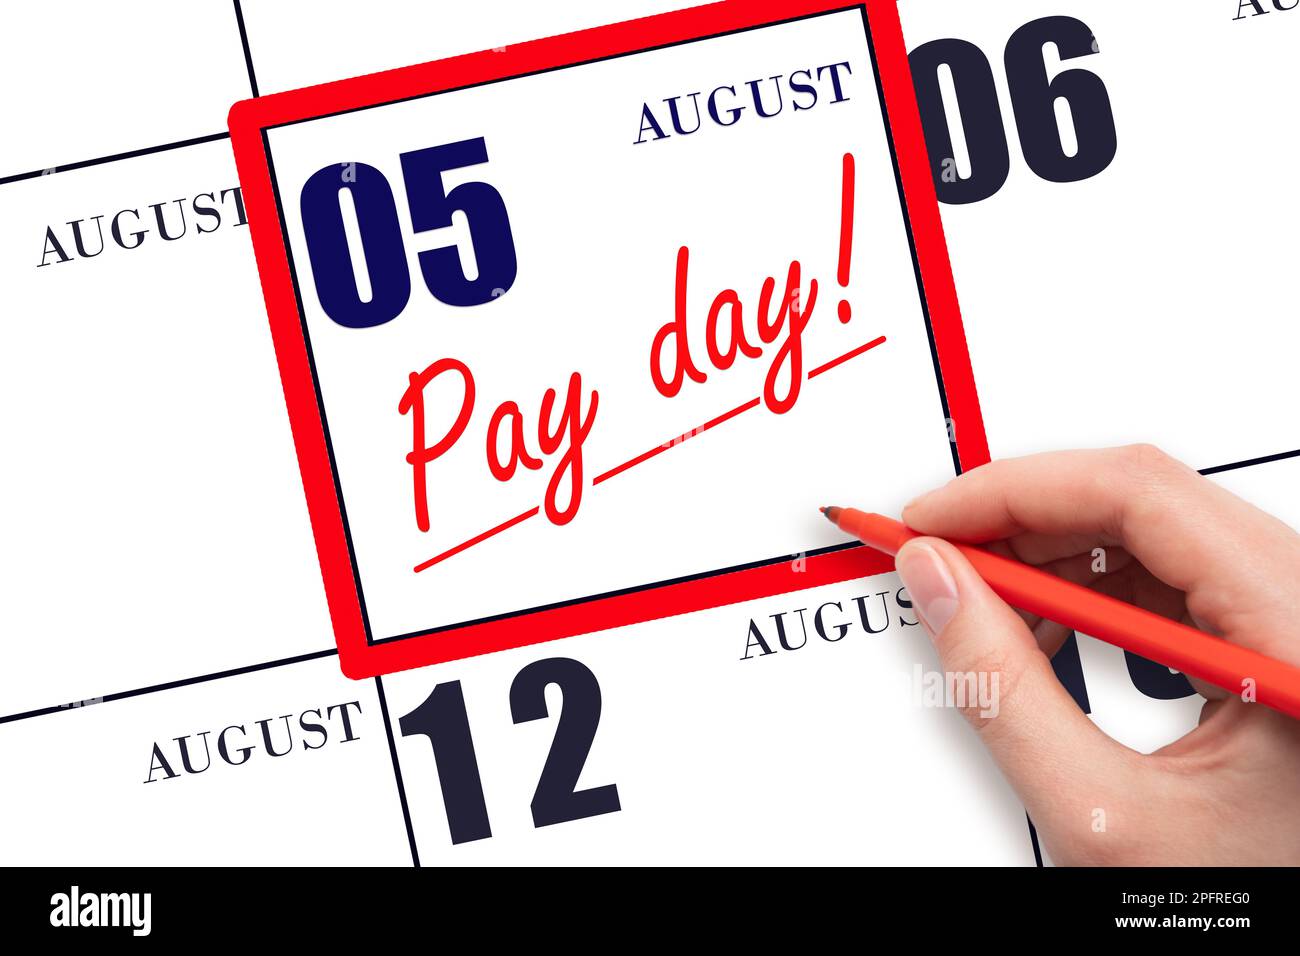 5th day of August. Hand writing text PAY DATE on calendar date August 5 and underline it. Payment due date.  Reminder concept of payment. Summer month Stock Photo